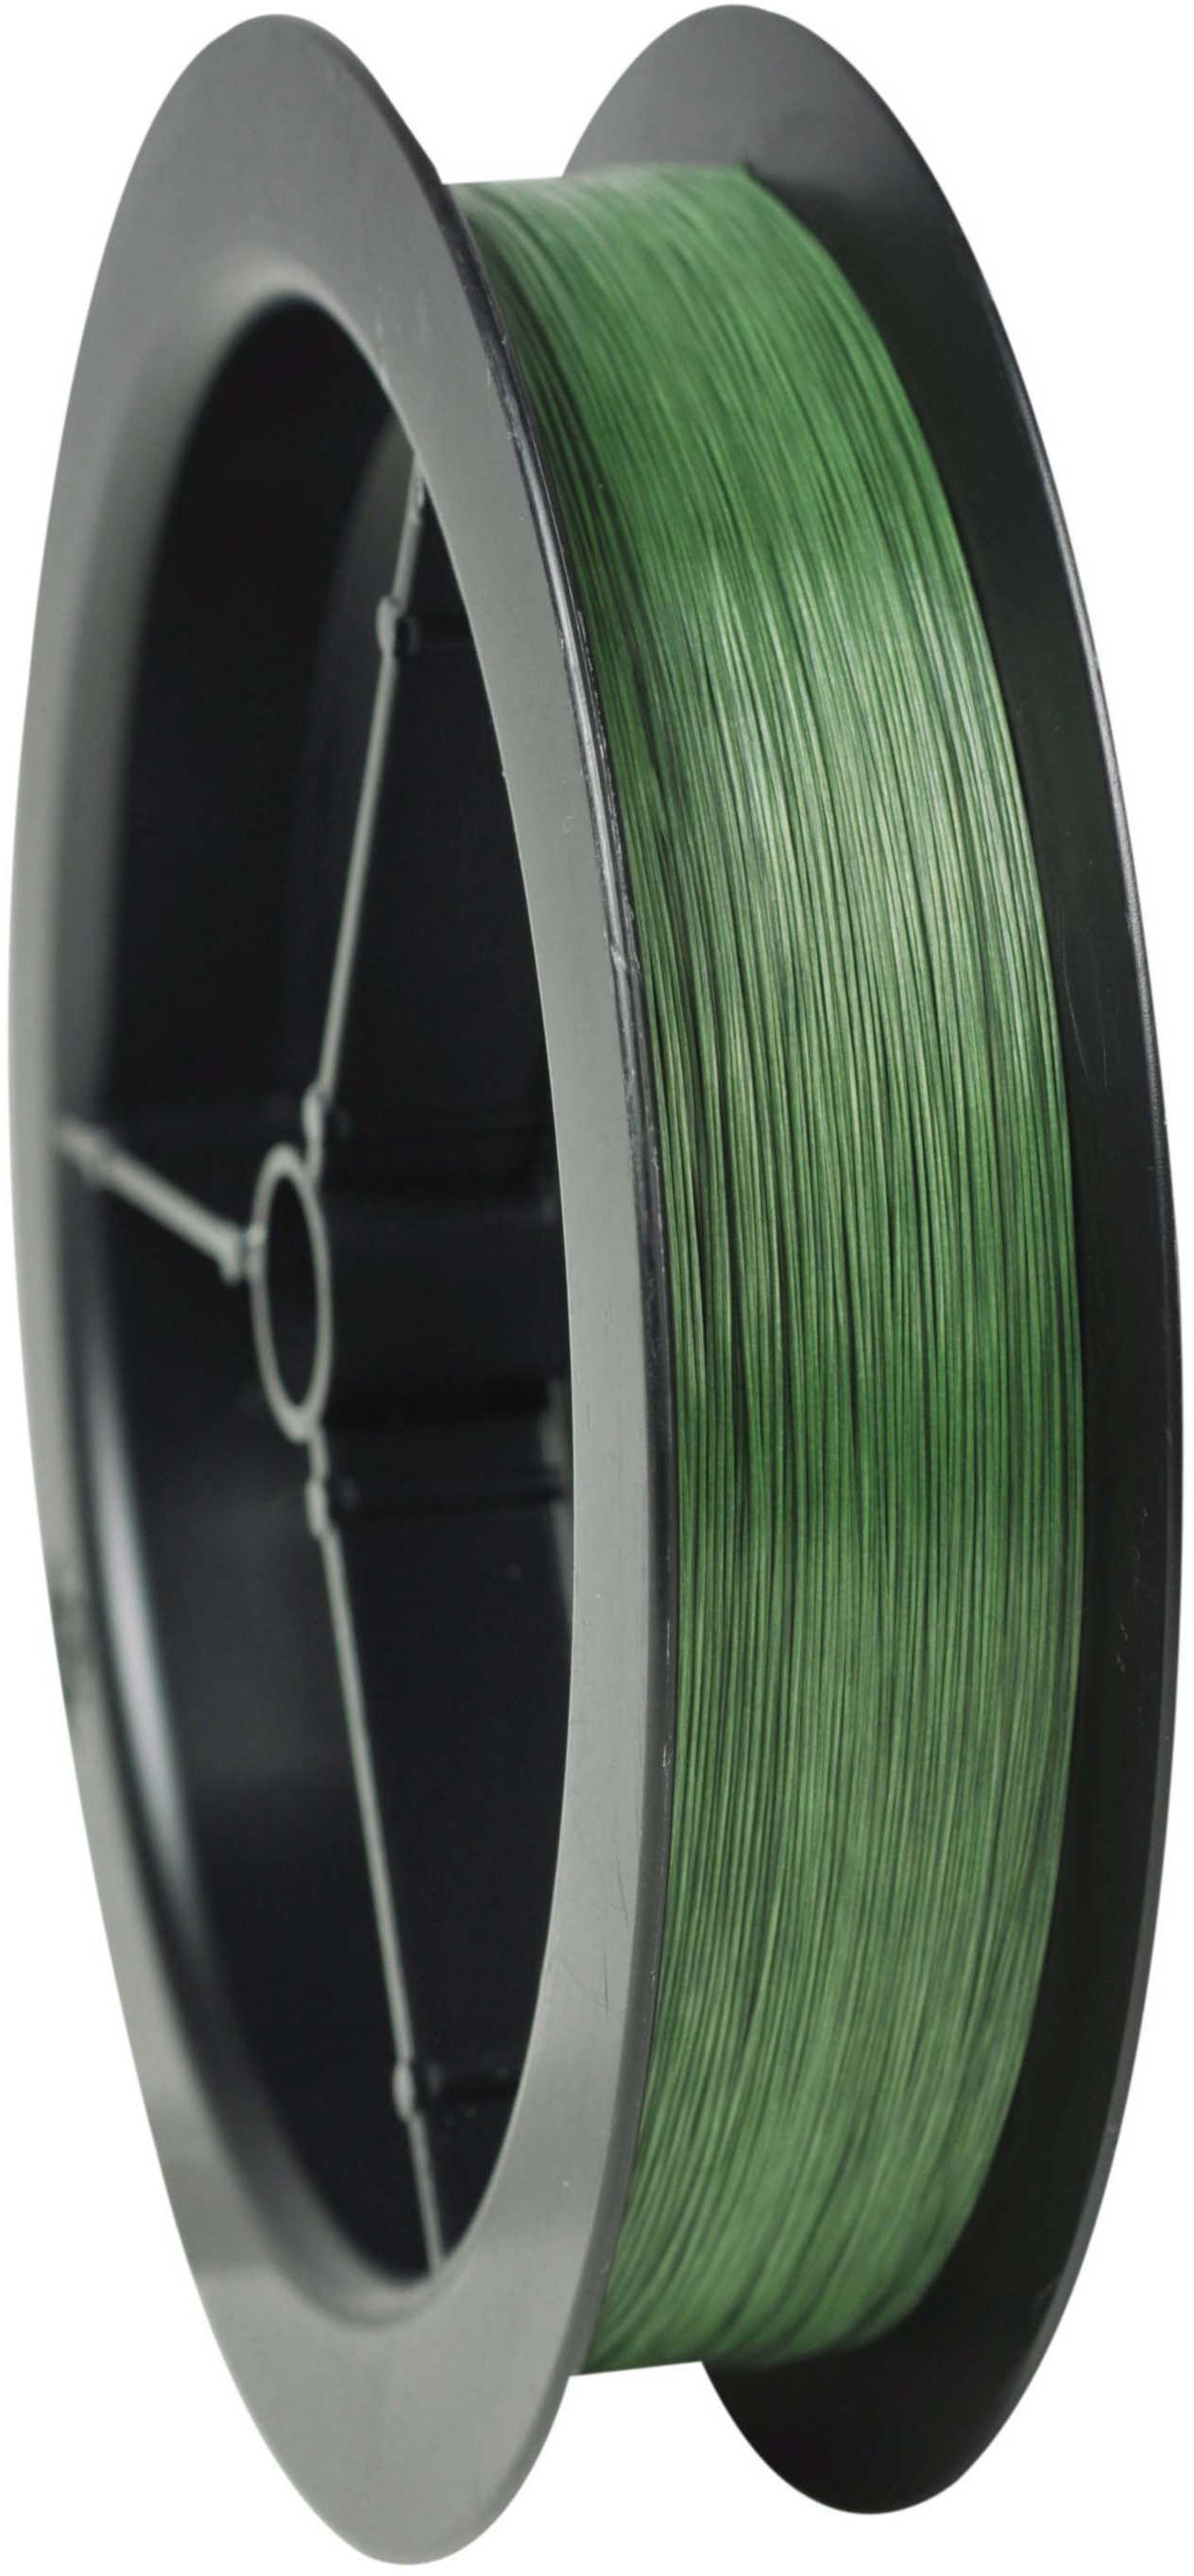 Spiderwire EZ Braided Line, Moss Green 30 lb Filler Spool, 300 Yards 1140574